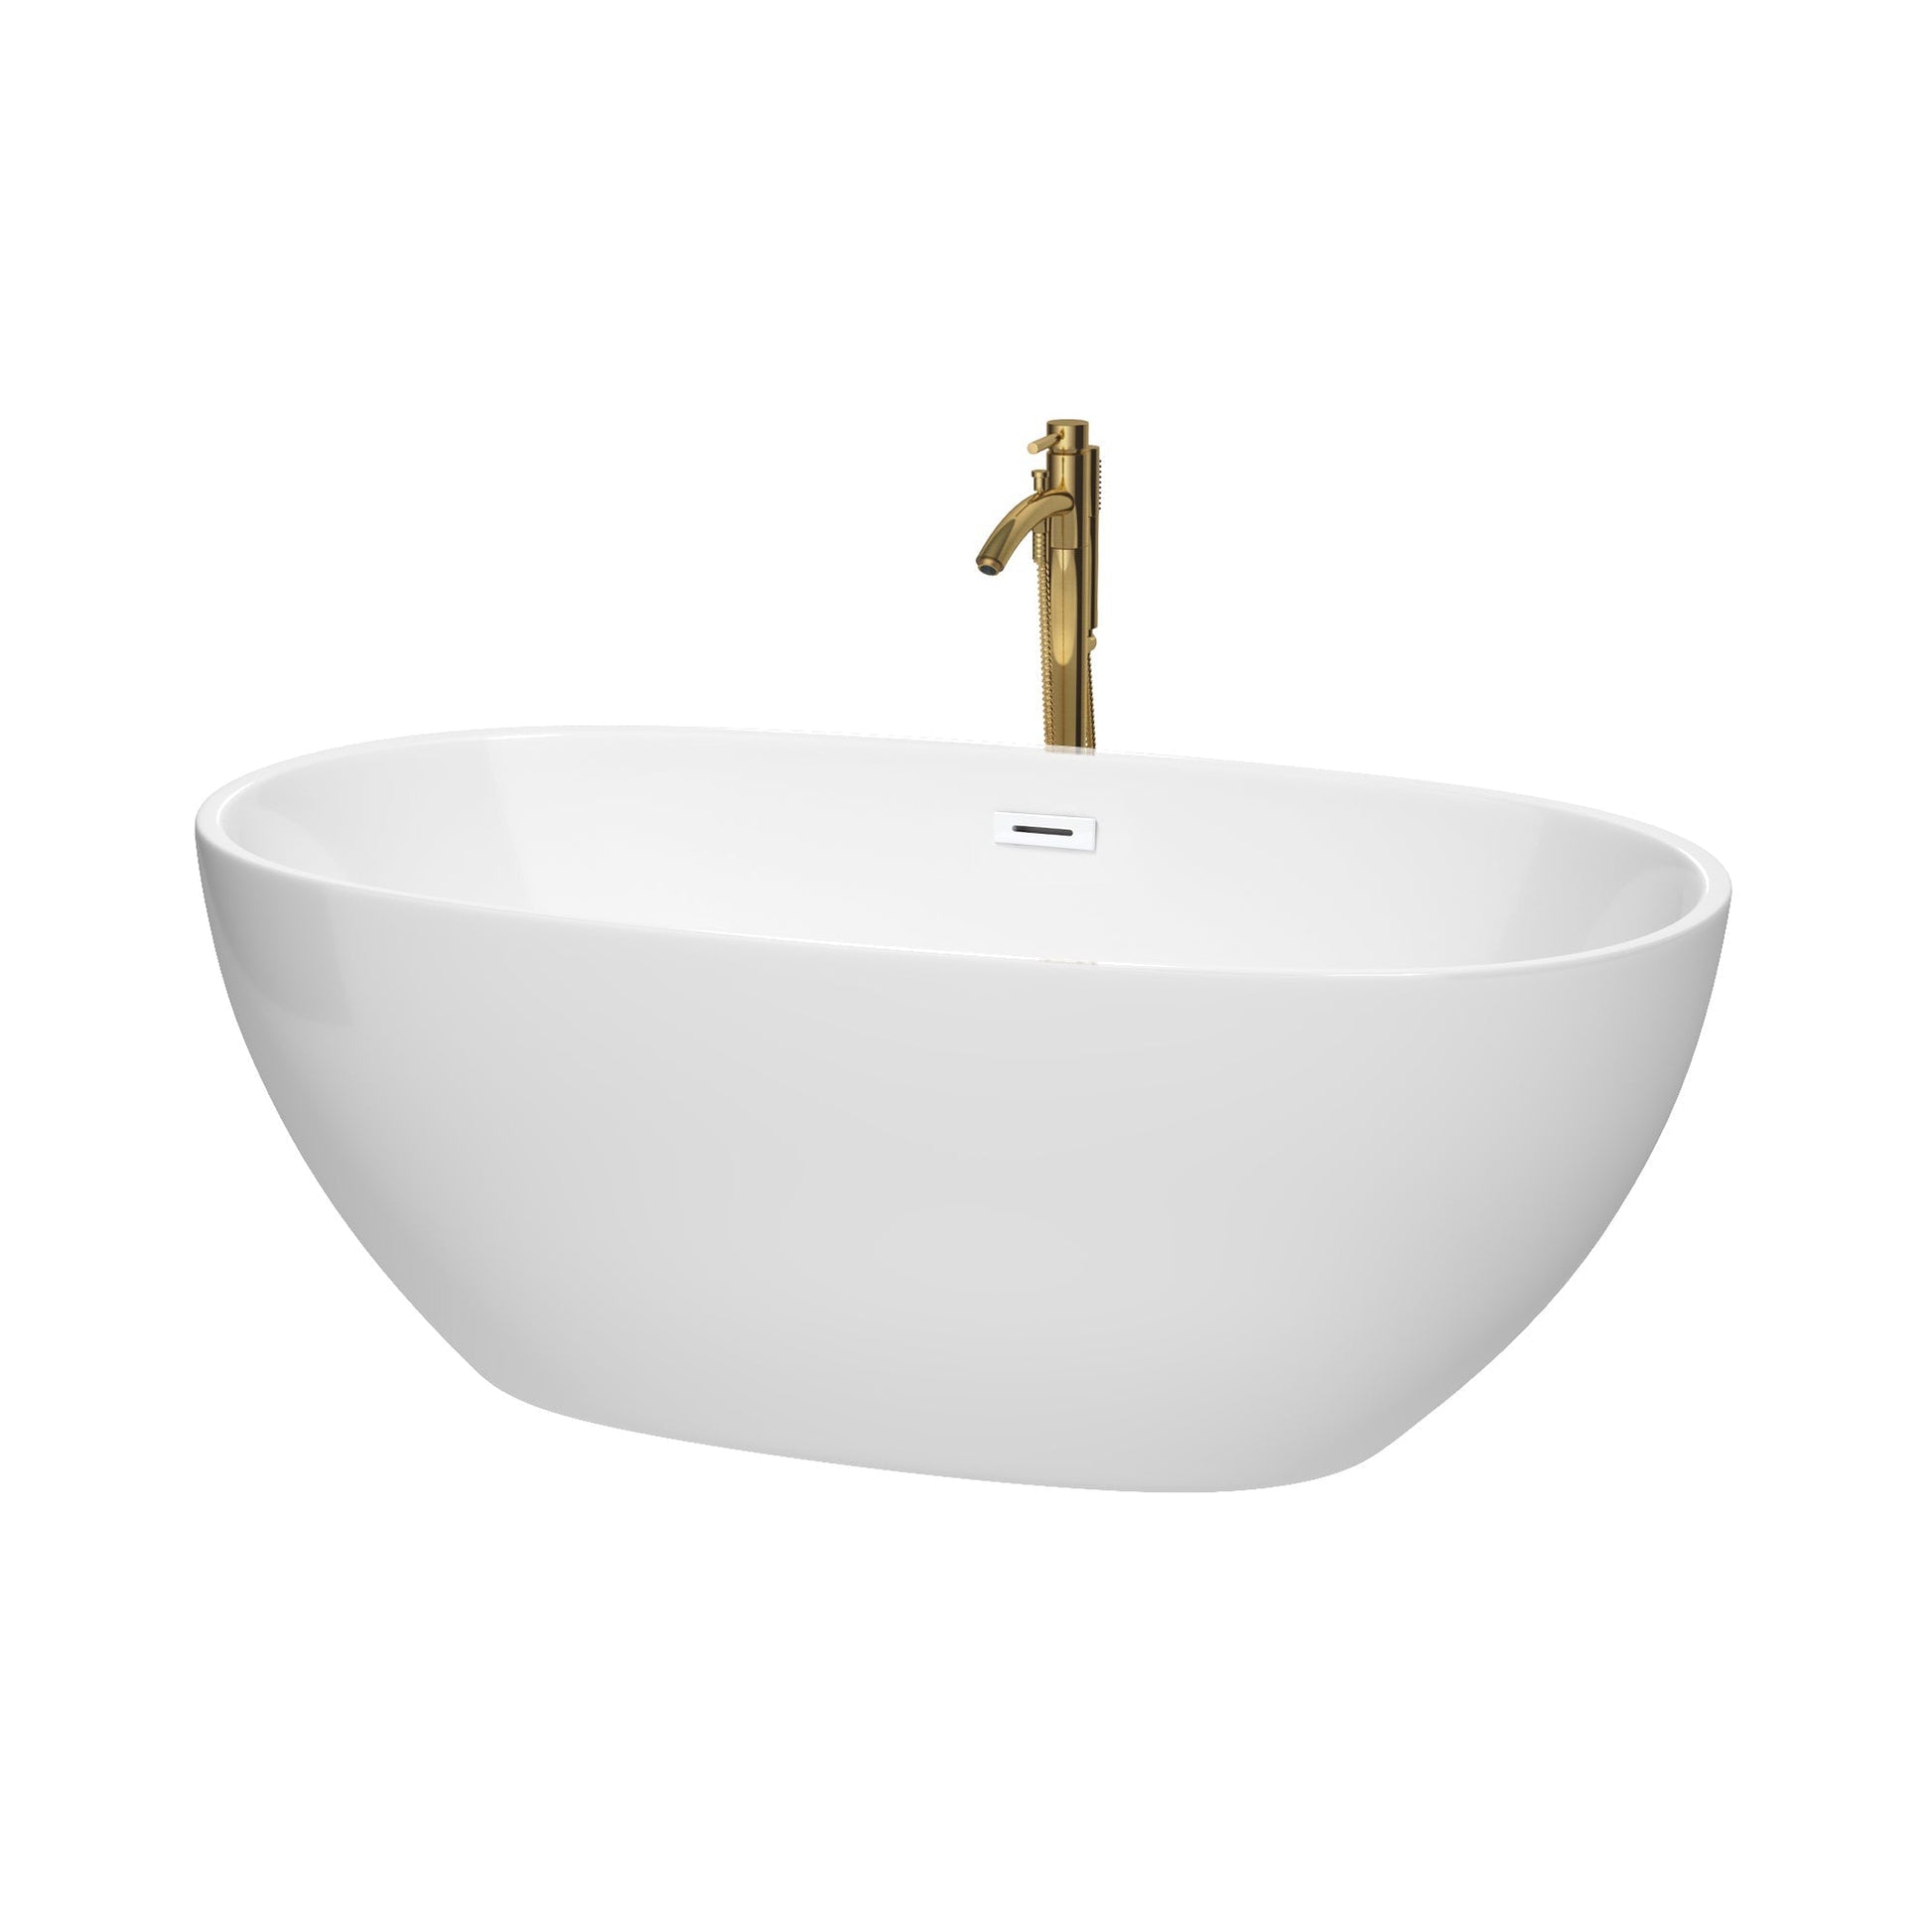 Wyndham Collection Juno 63" Freestanding Bathtub in White With Shiny White Trim and Floor Mounted Faucet in Brushed Gold